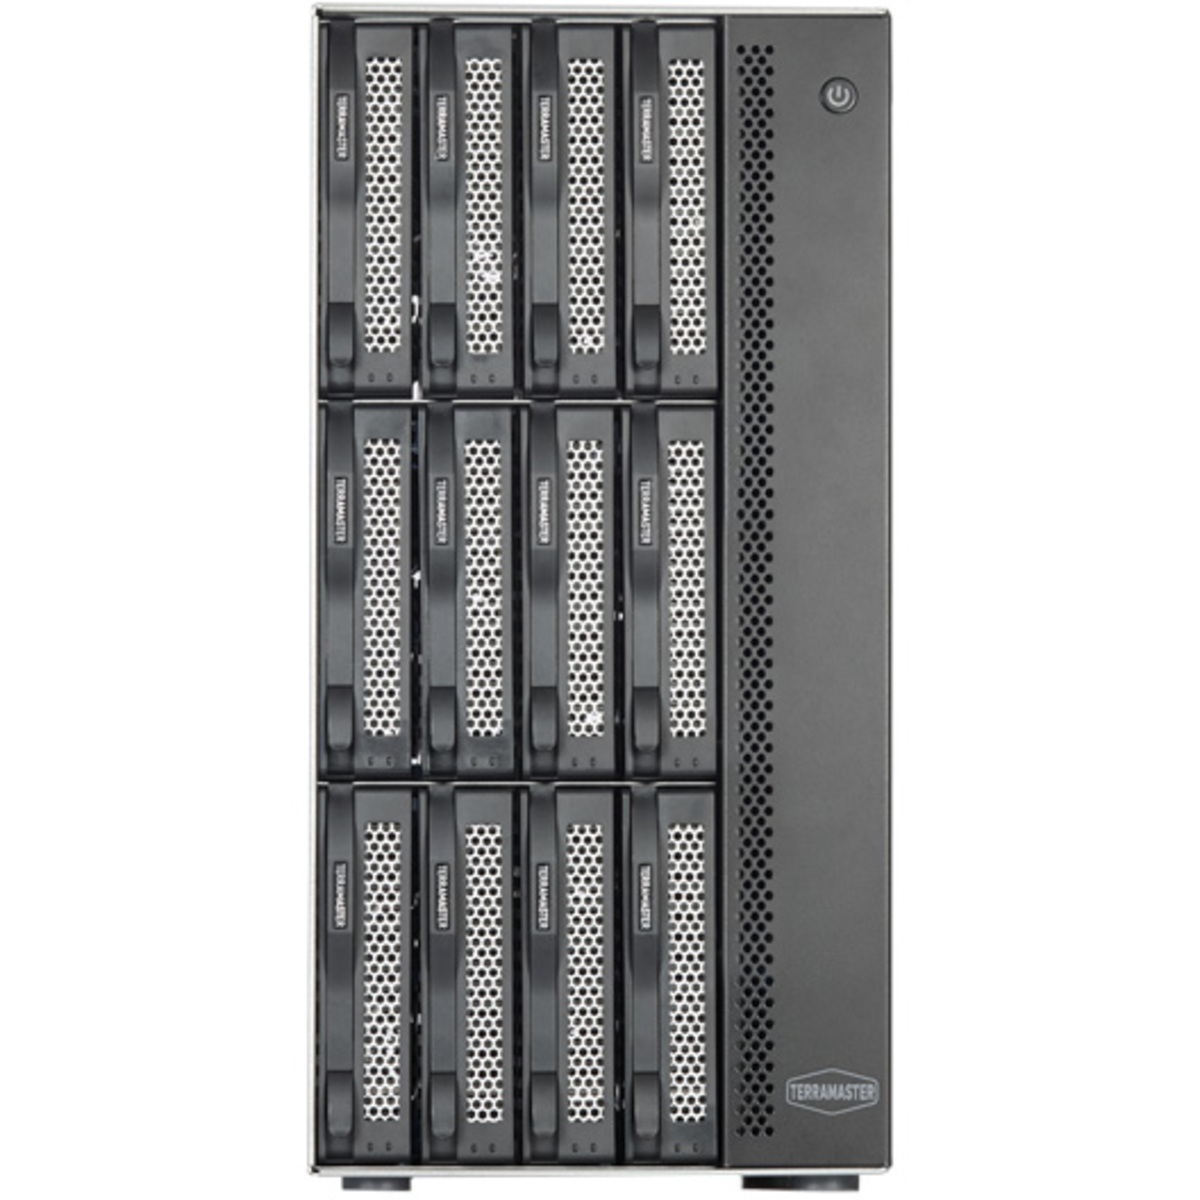 TerraMaster T12-450 144tb 12-Bay Desktop Multimedia / Power User / Business NAS - Network Attached Storage Device 8x18tb Western Digital Ultrastar DC HC550 WUH721818ALE6L4 3.5 7200rpm SATA 6Gb/s HDD ENTERPRISE Class Drives Installed - Burn-In Tested T12-450